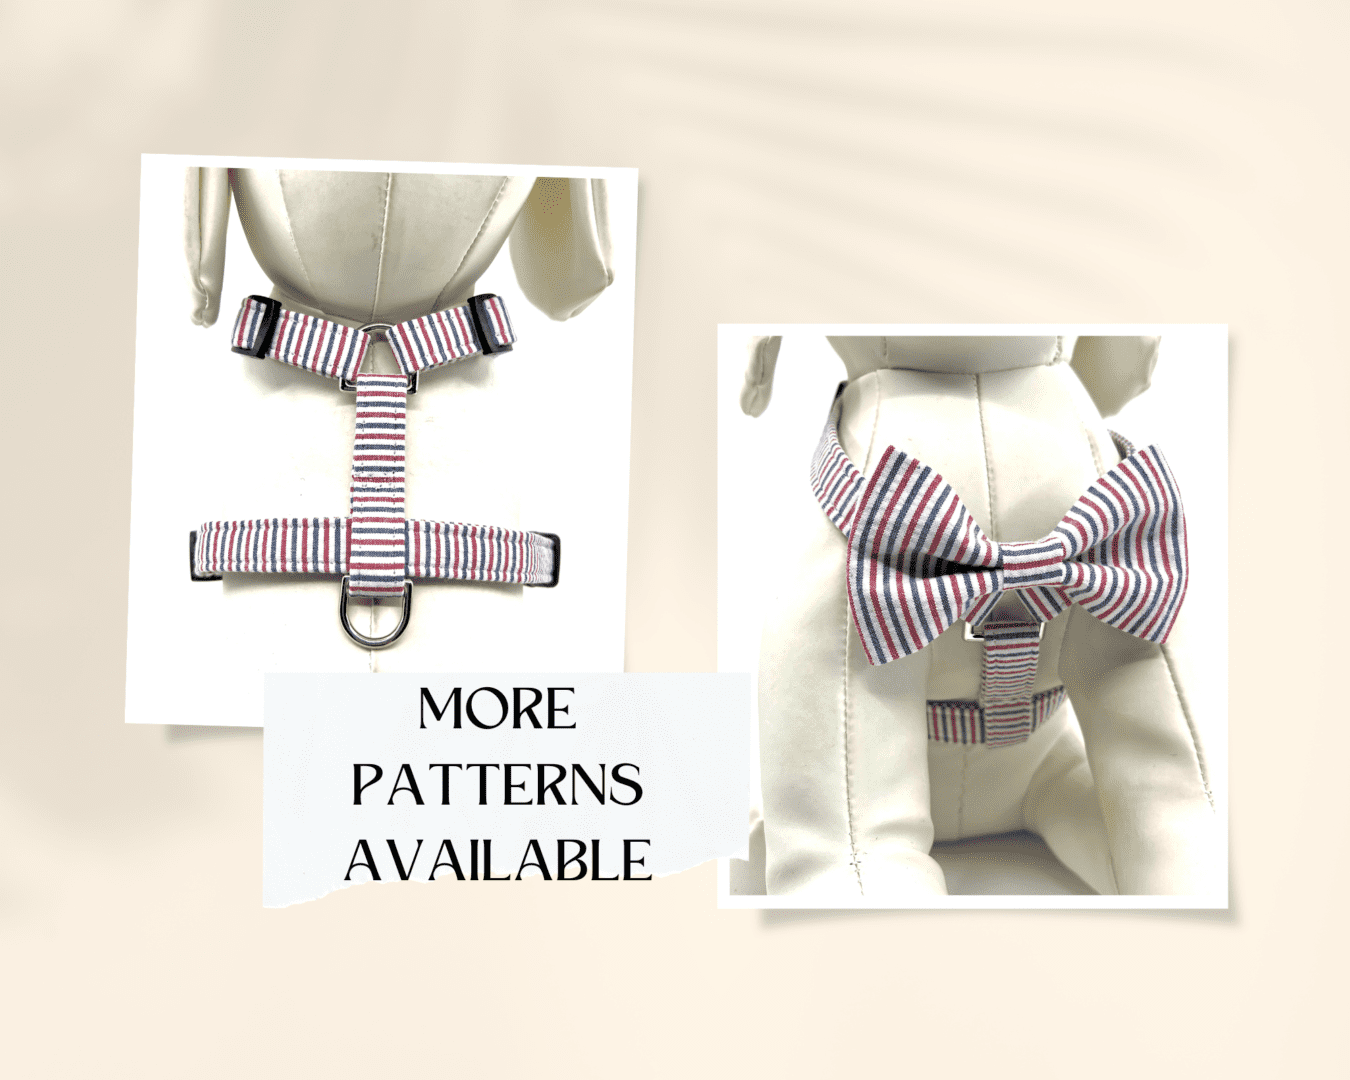 A dog collar and bow tie are available for purchase.